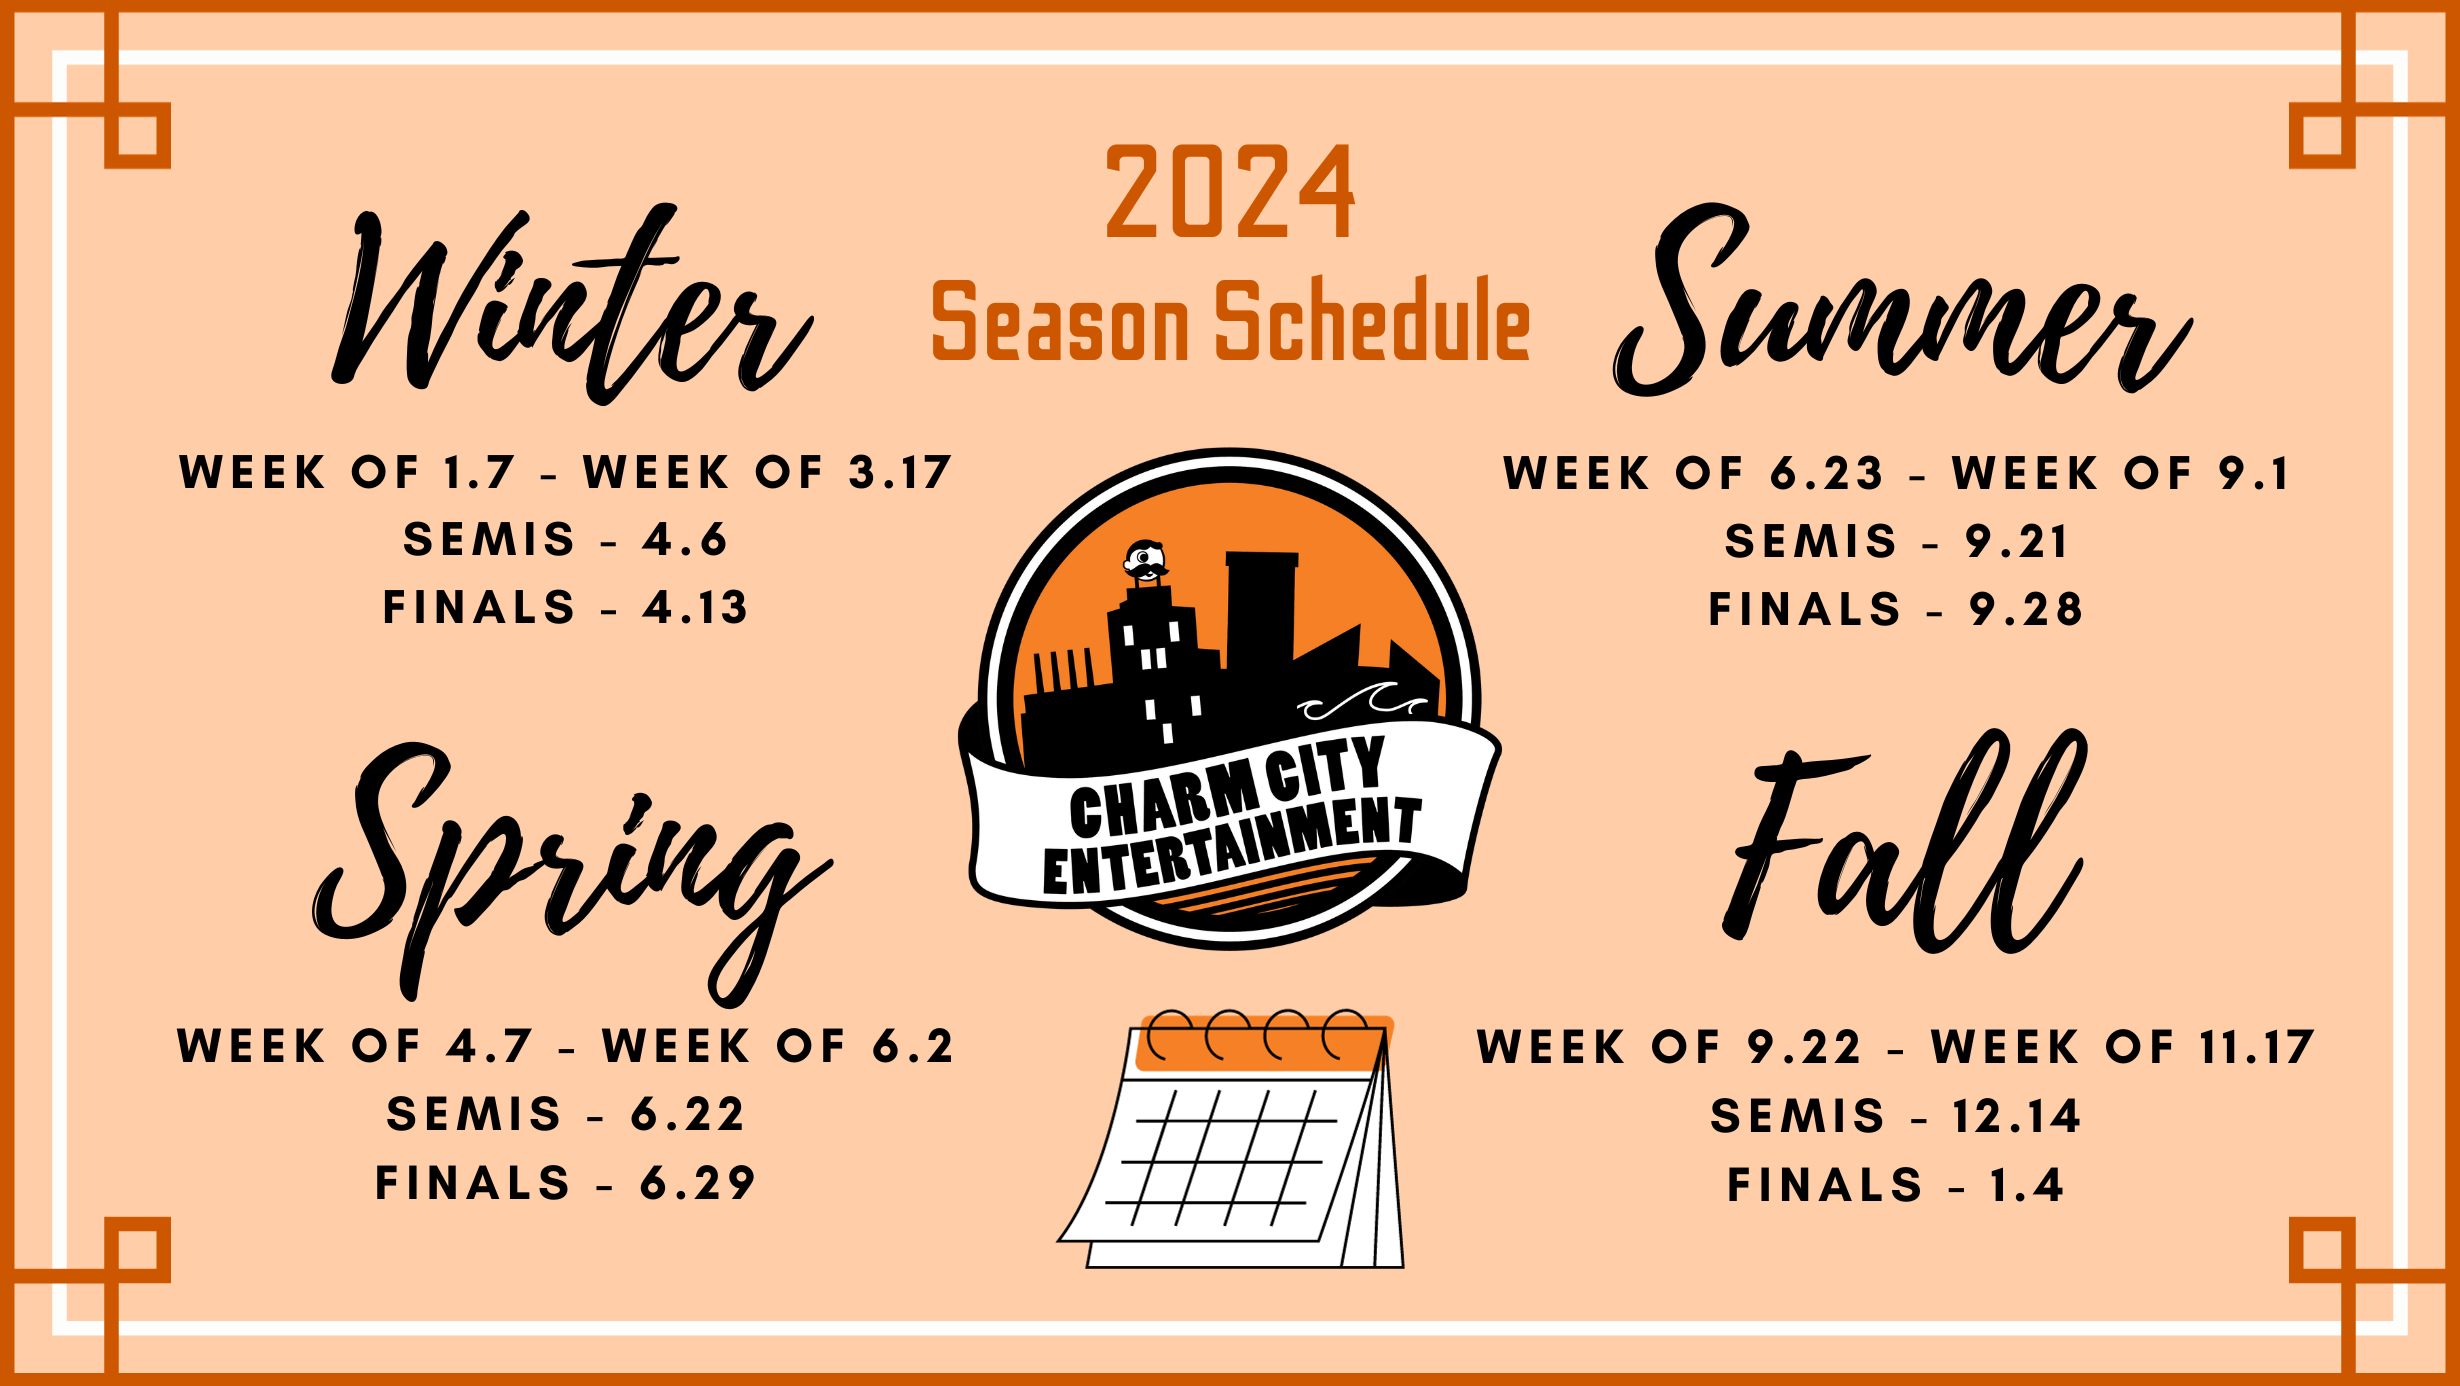 a light orange background with a dark orange and white border, the charm city entertainment logo. a calendar icon, and dark orange and black text. The dark orange text reads: 2024 Season Schedule. The black text includes the dates for each of this year's trivia seasons, the dates can also be found in the article.